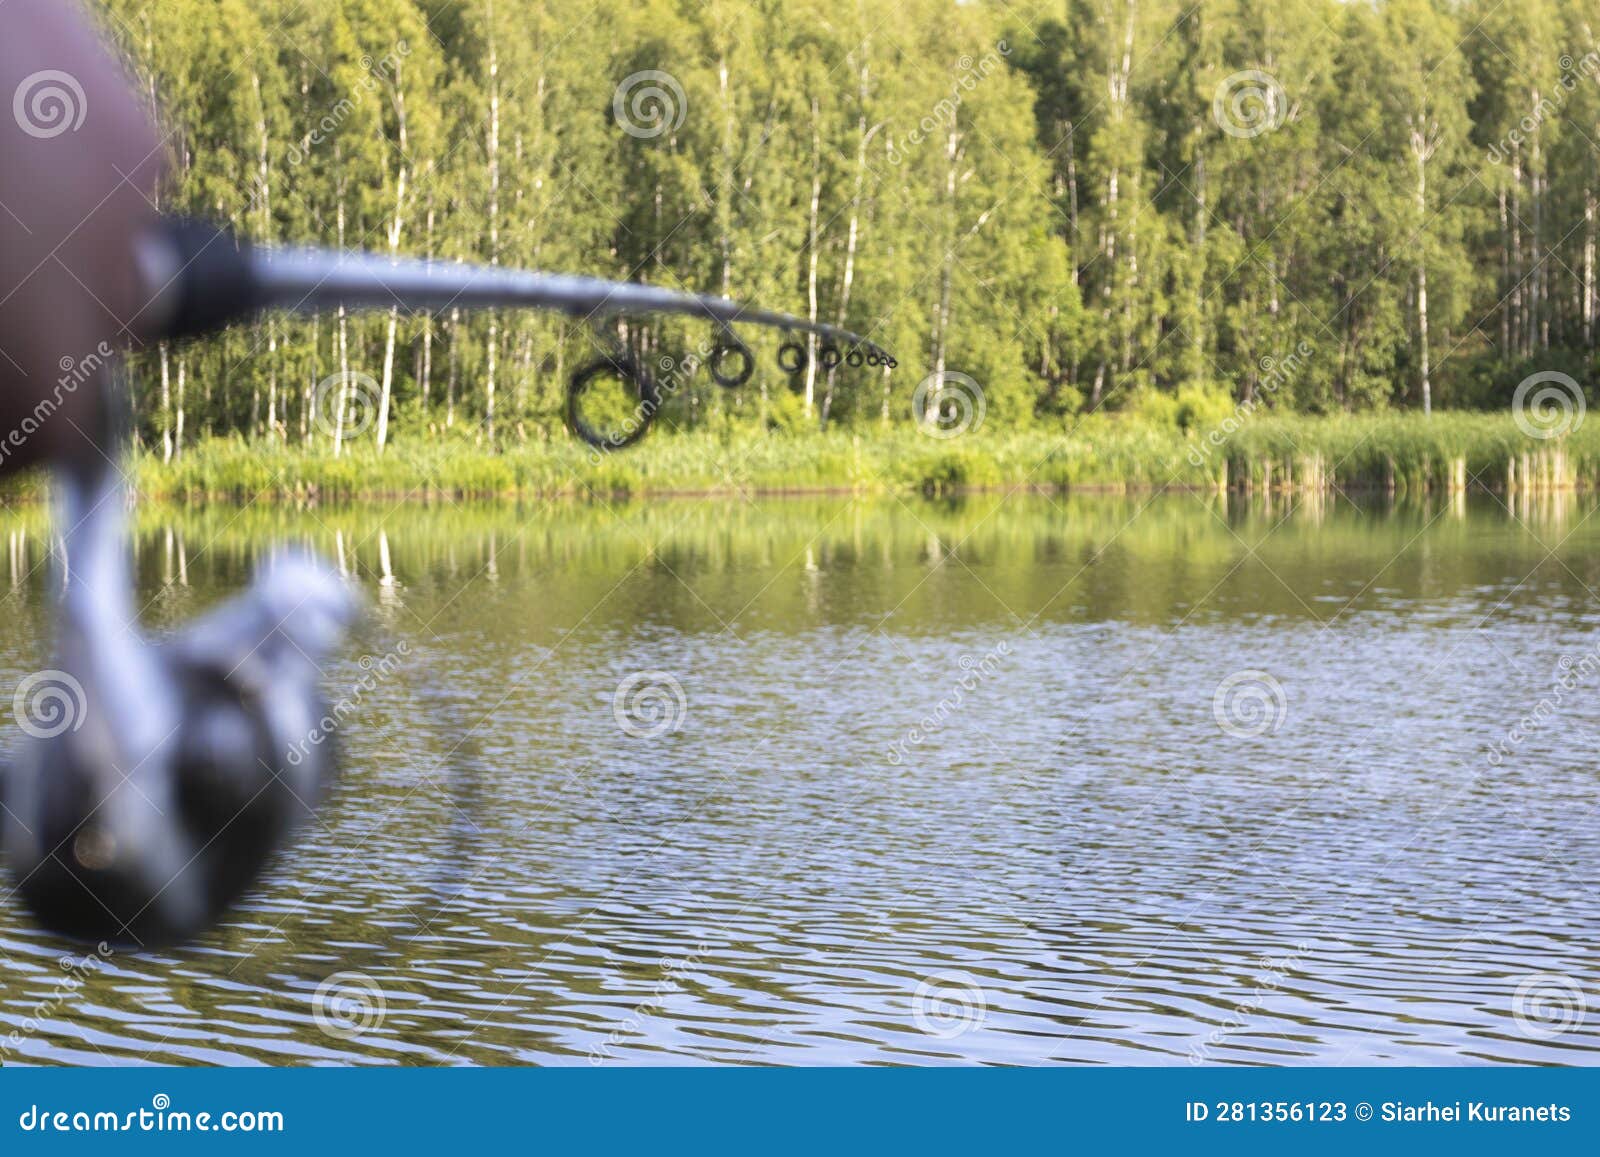 https://thumbs.dreamstime.com/z/fisherman-fishing-rods-spinning-reel-river-bank-lake-has-no-focus-sunrise-pike-perch-carp-concept-country-281356123.jpg